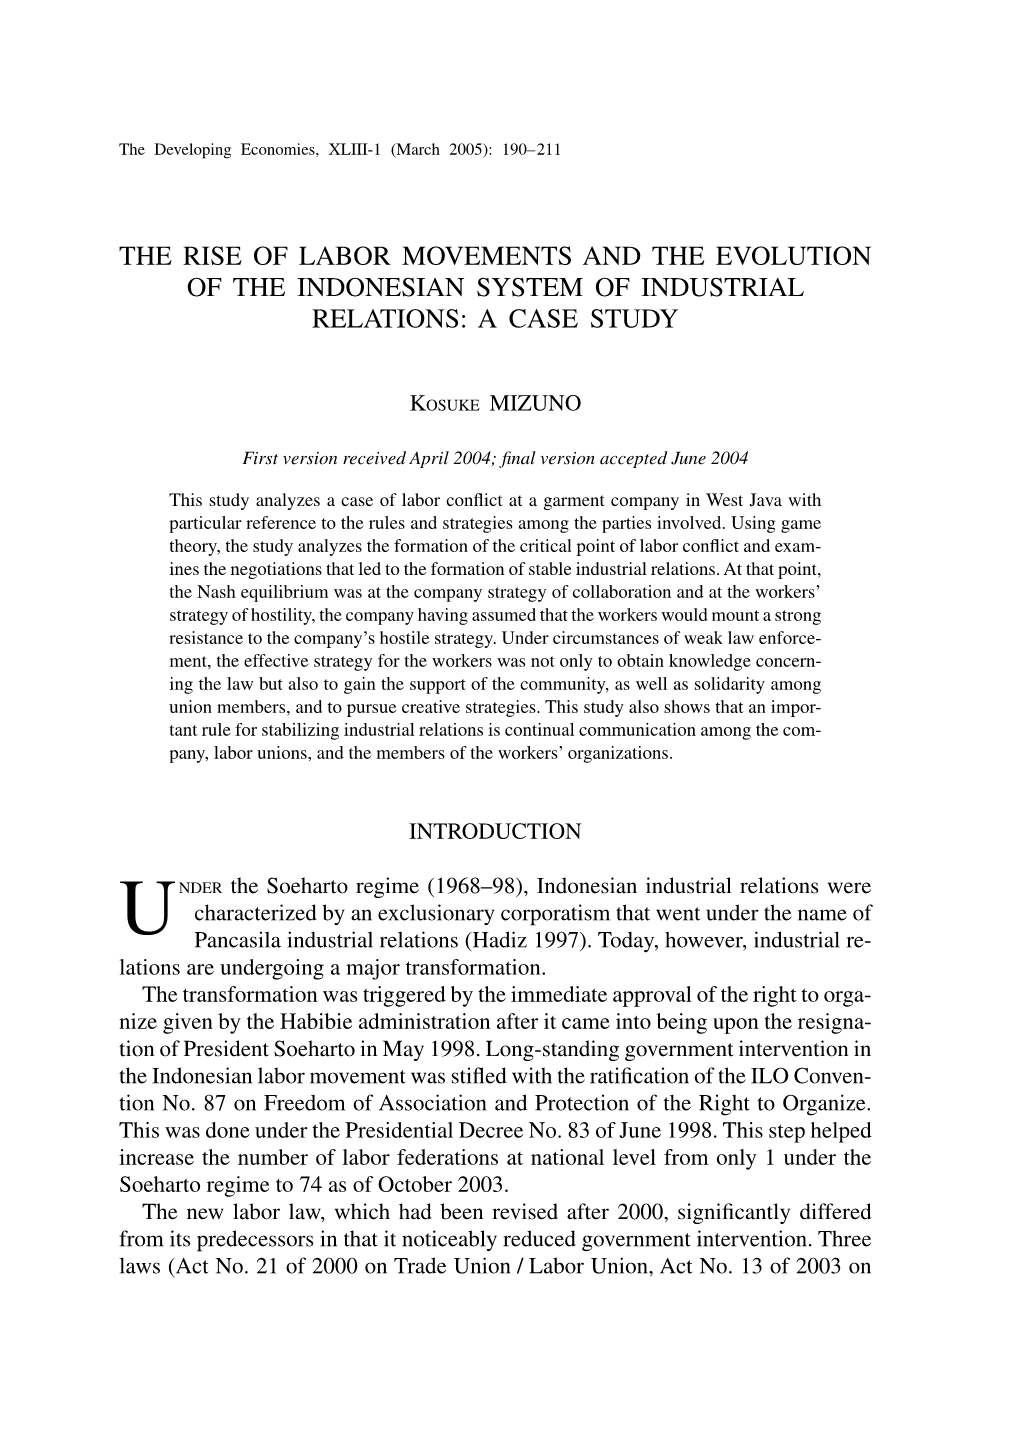 The Rise of Labor Movements and the Evolution of the Indonesian System of Industrial Relations: a Case Study